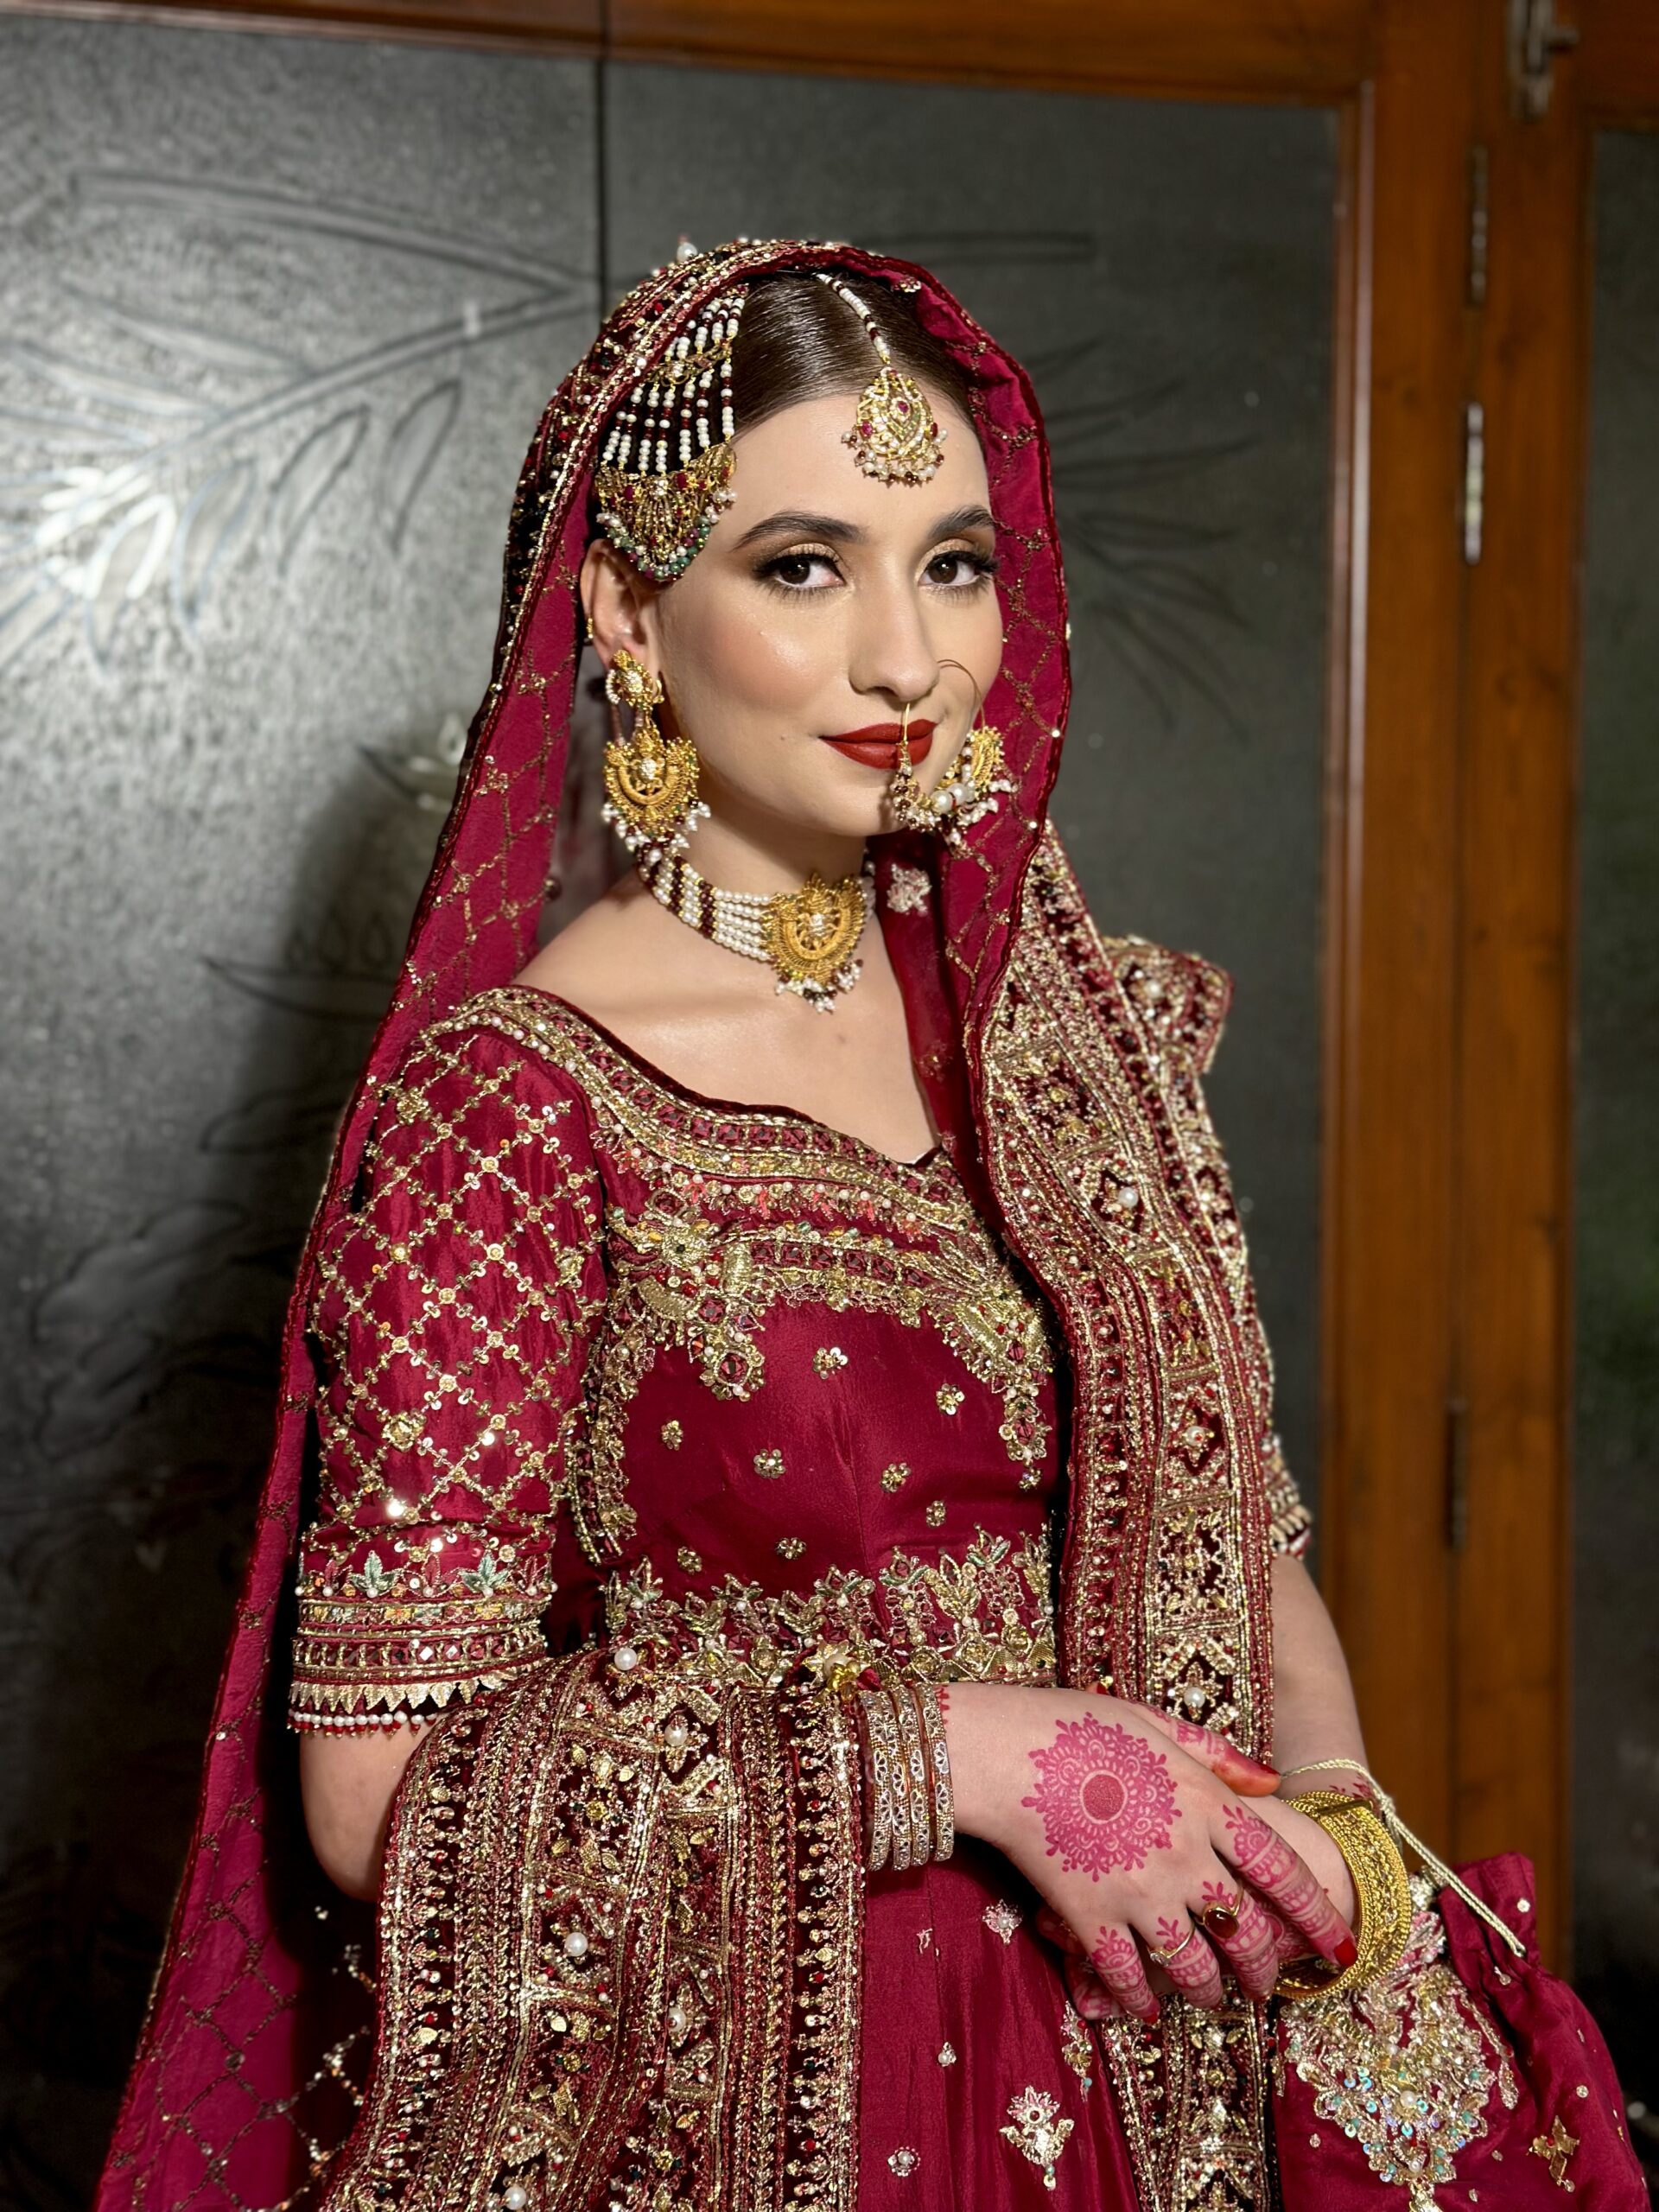 Diverse bridal makeup portfolio featuring looks for various skin tones and cultural backgrounds.